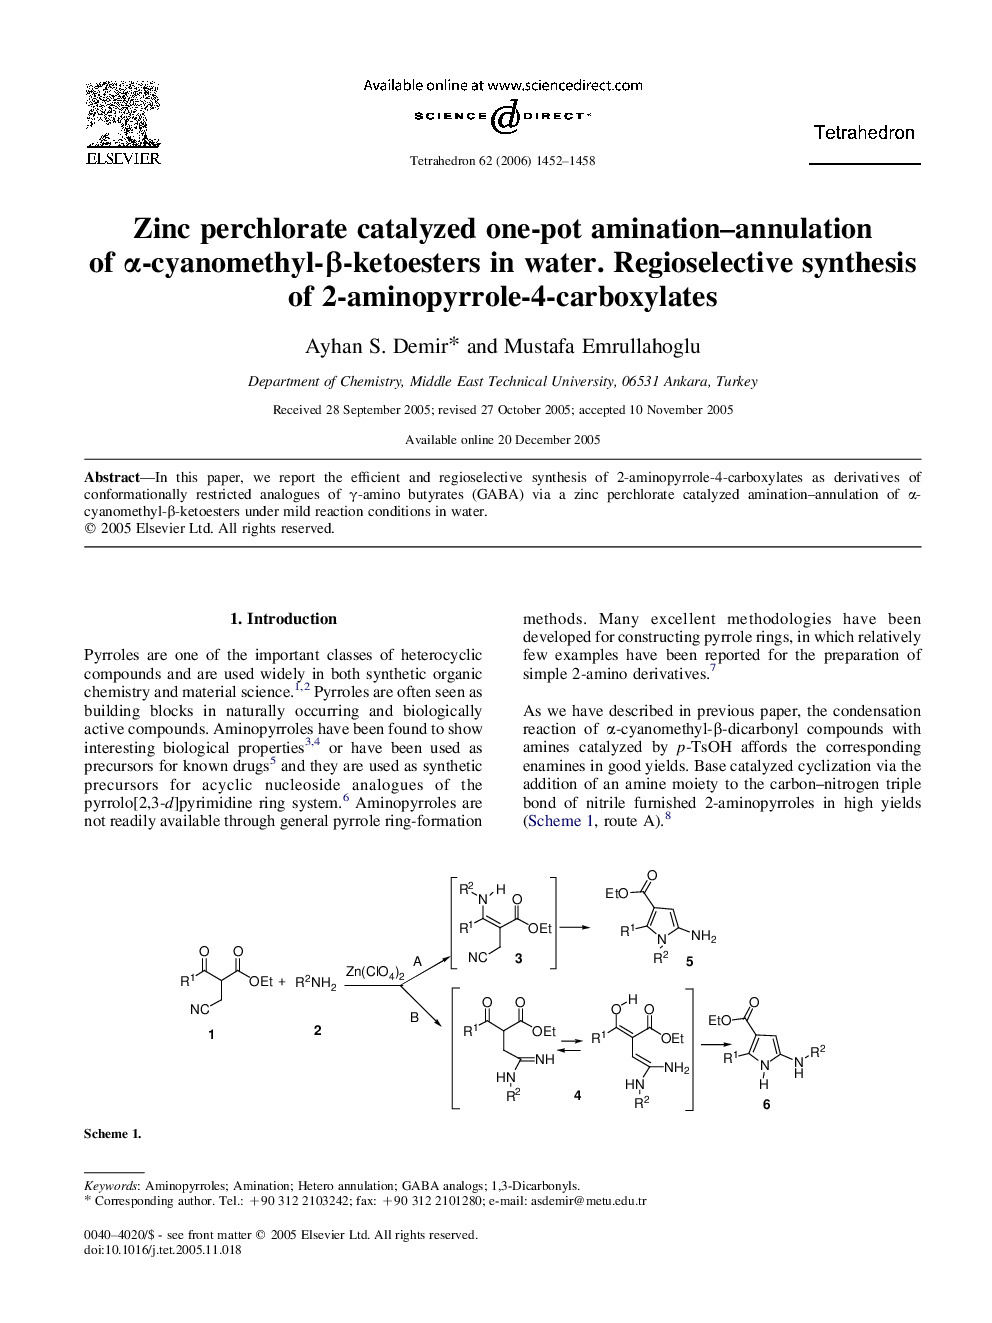 Zinc perchlorate catalyzed one-pot amination-annulation of Î±-cyanomethyl-Î²-ketoesters in water. Regioselective synthesis of 2-aminopyrrole-4-carboxylates